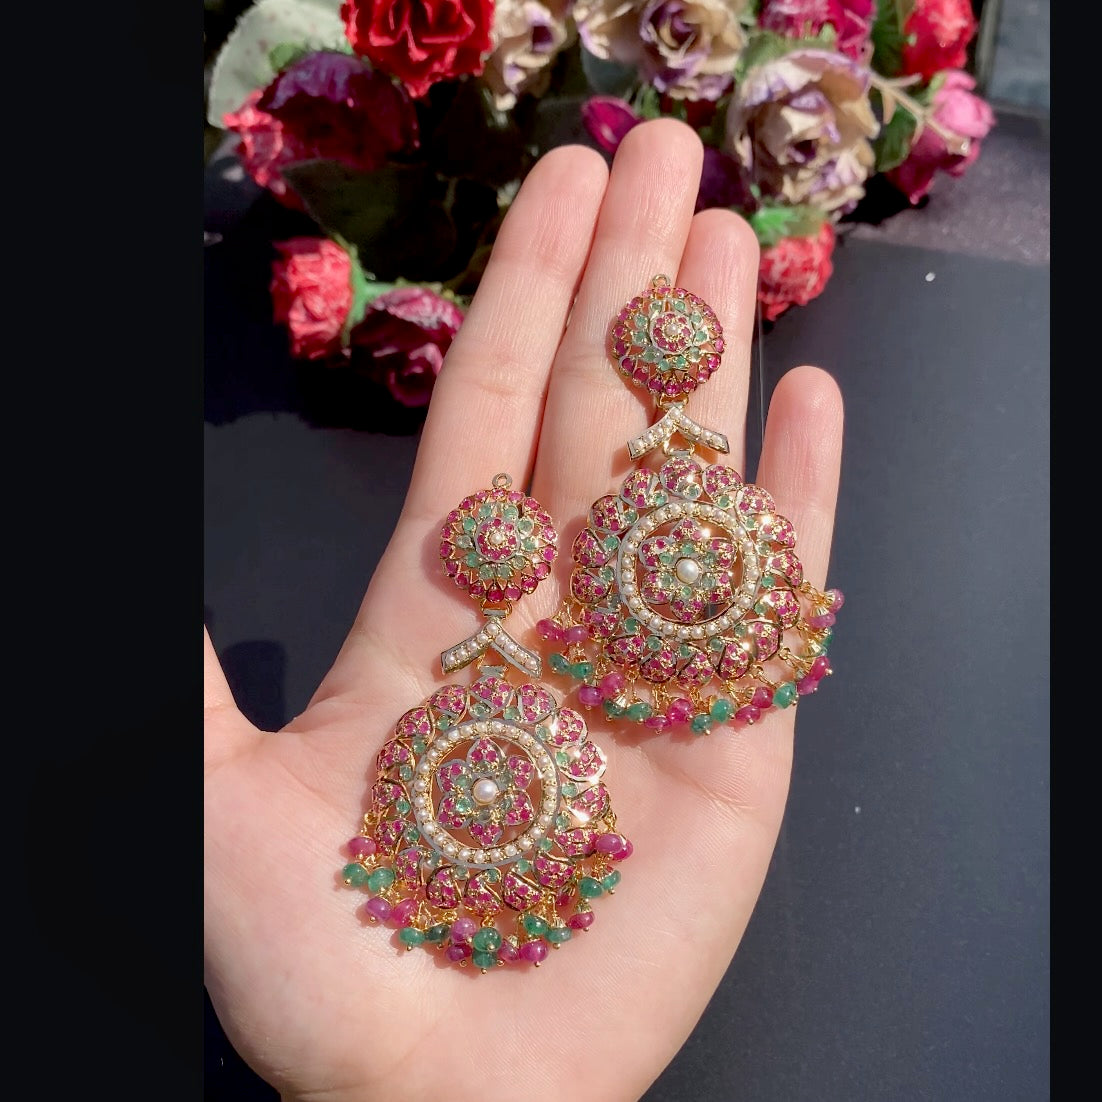 Regal Intricate Gold earrings for bride under 200,000